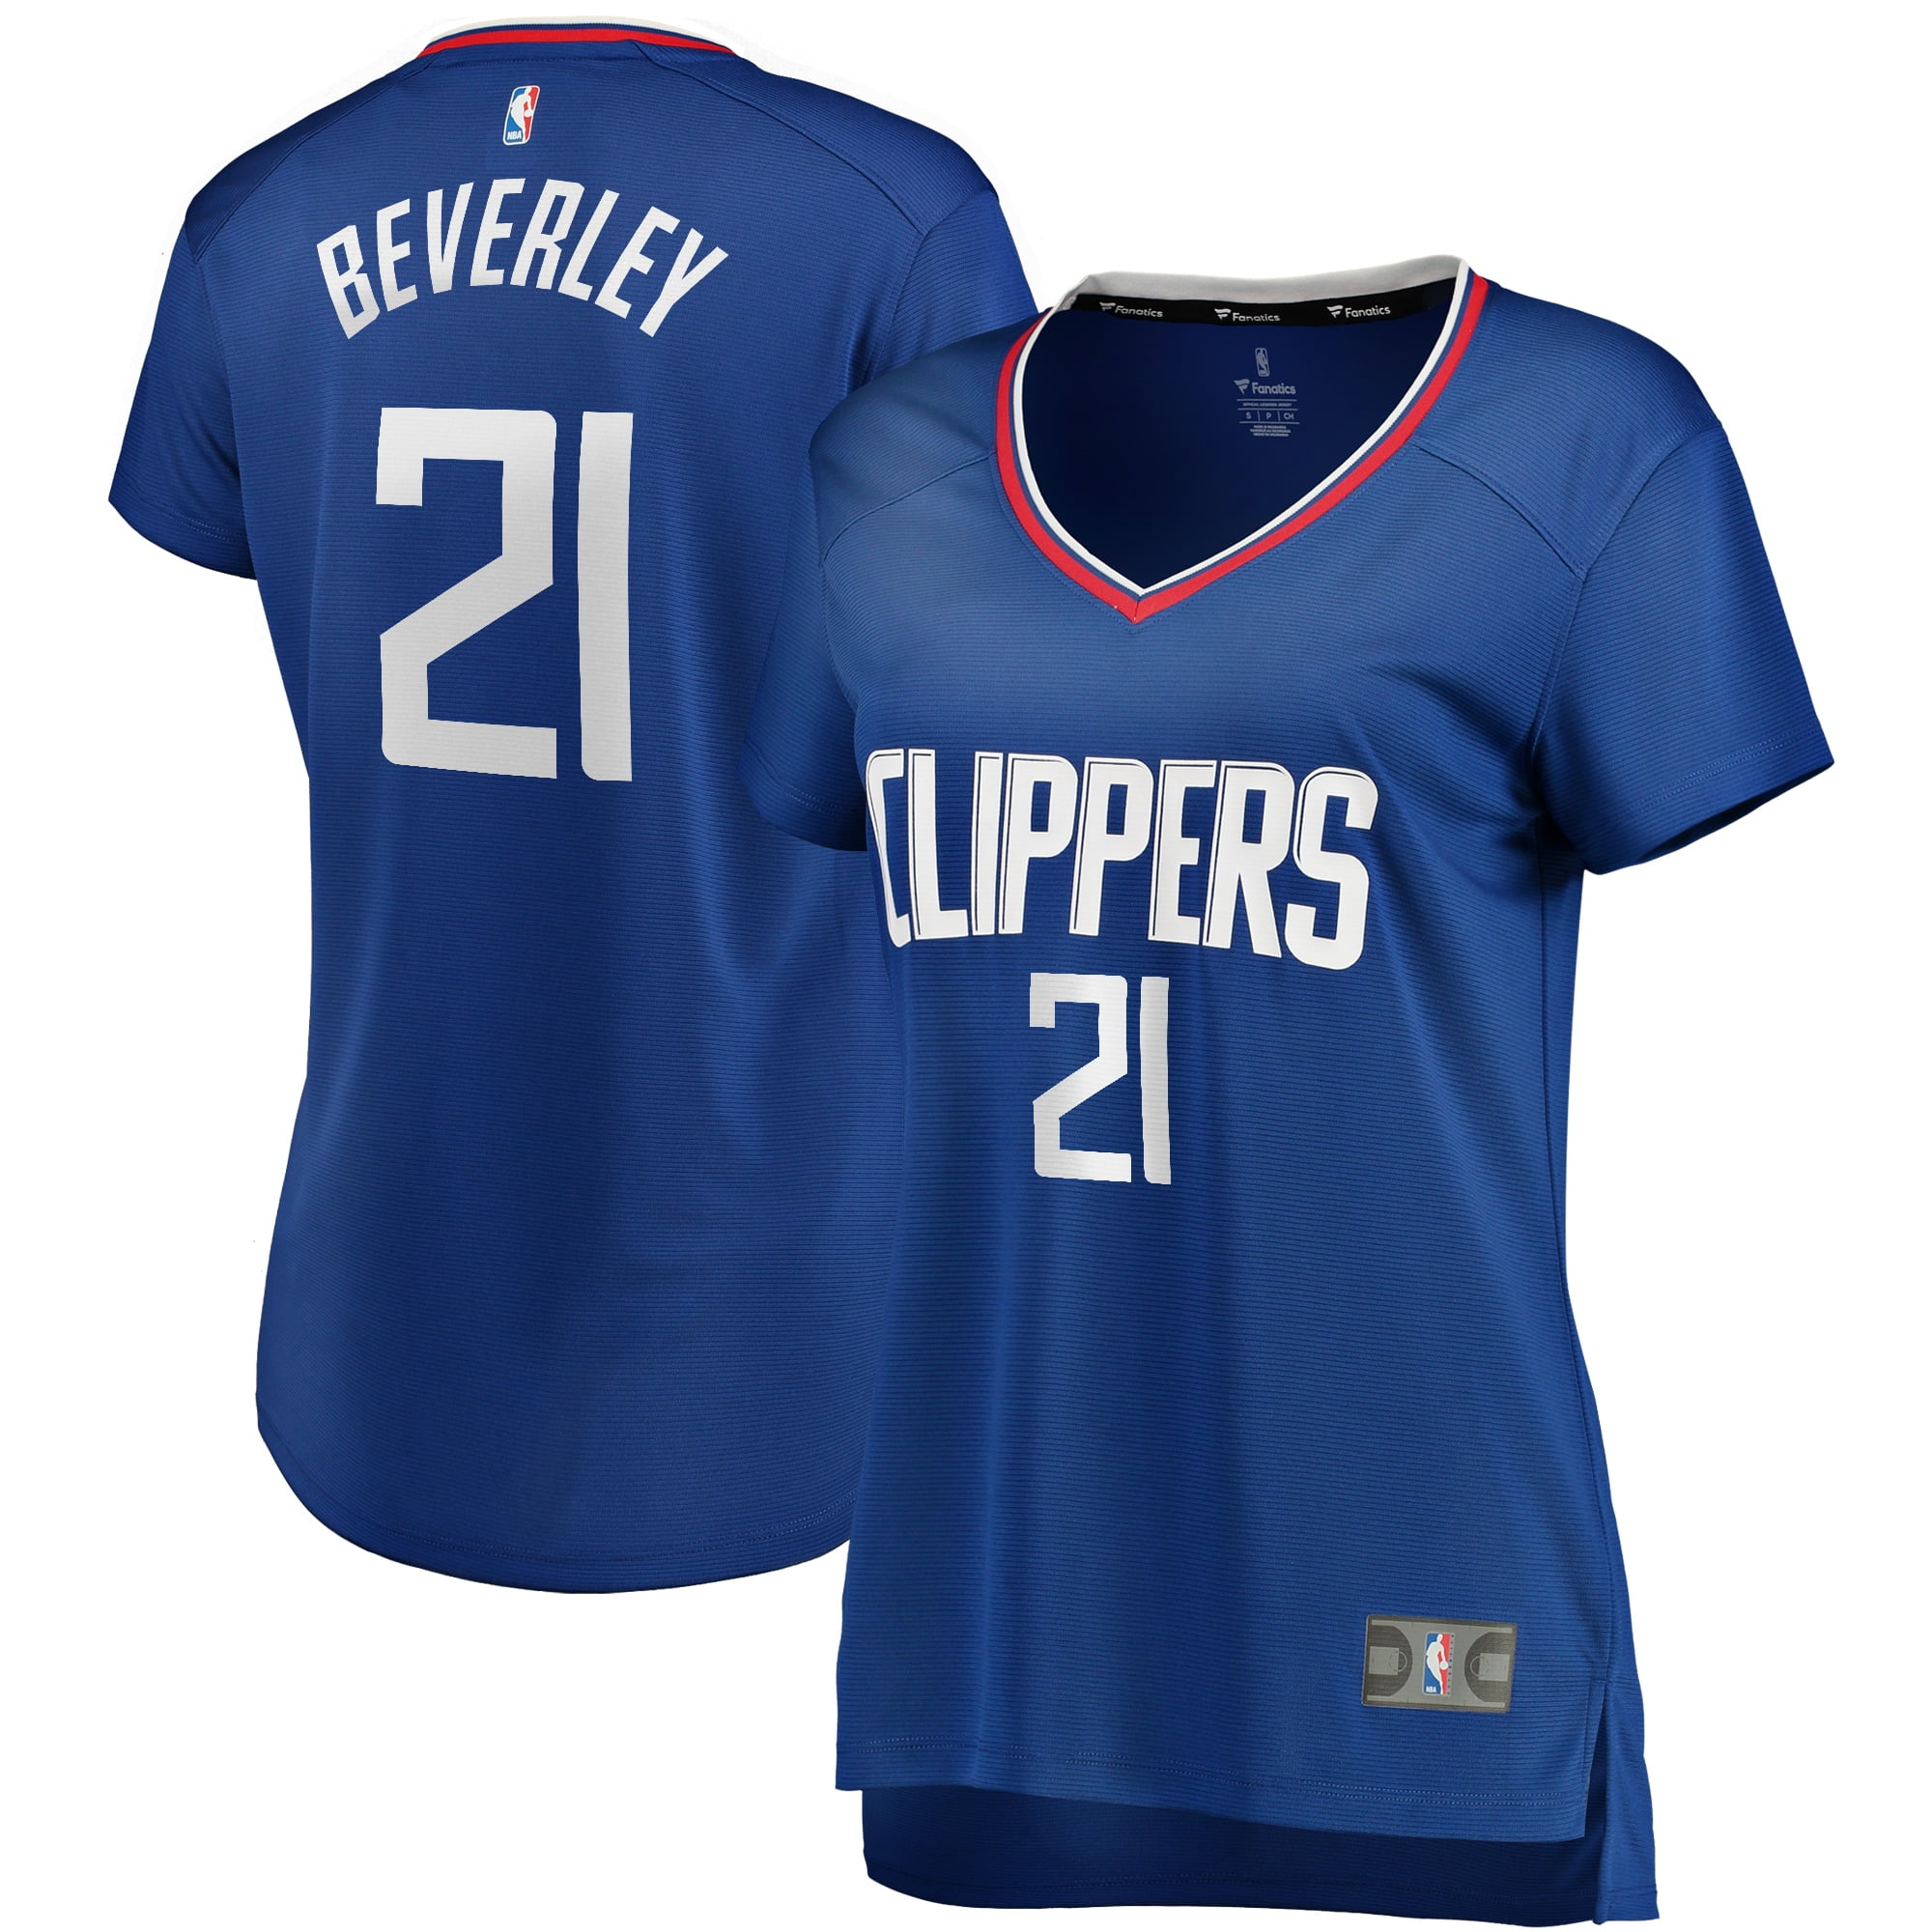 beverley clippers jersey